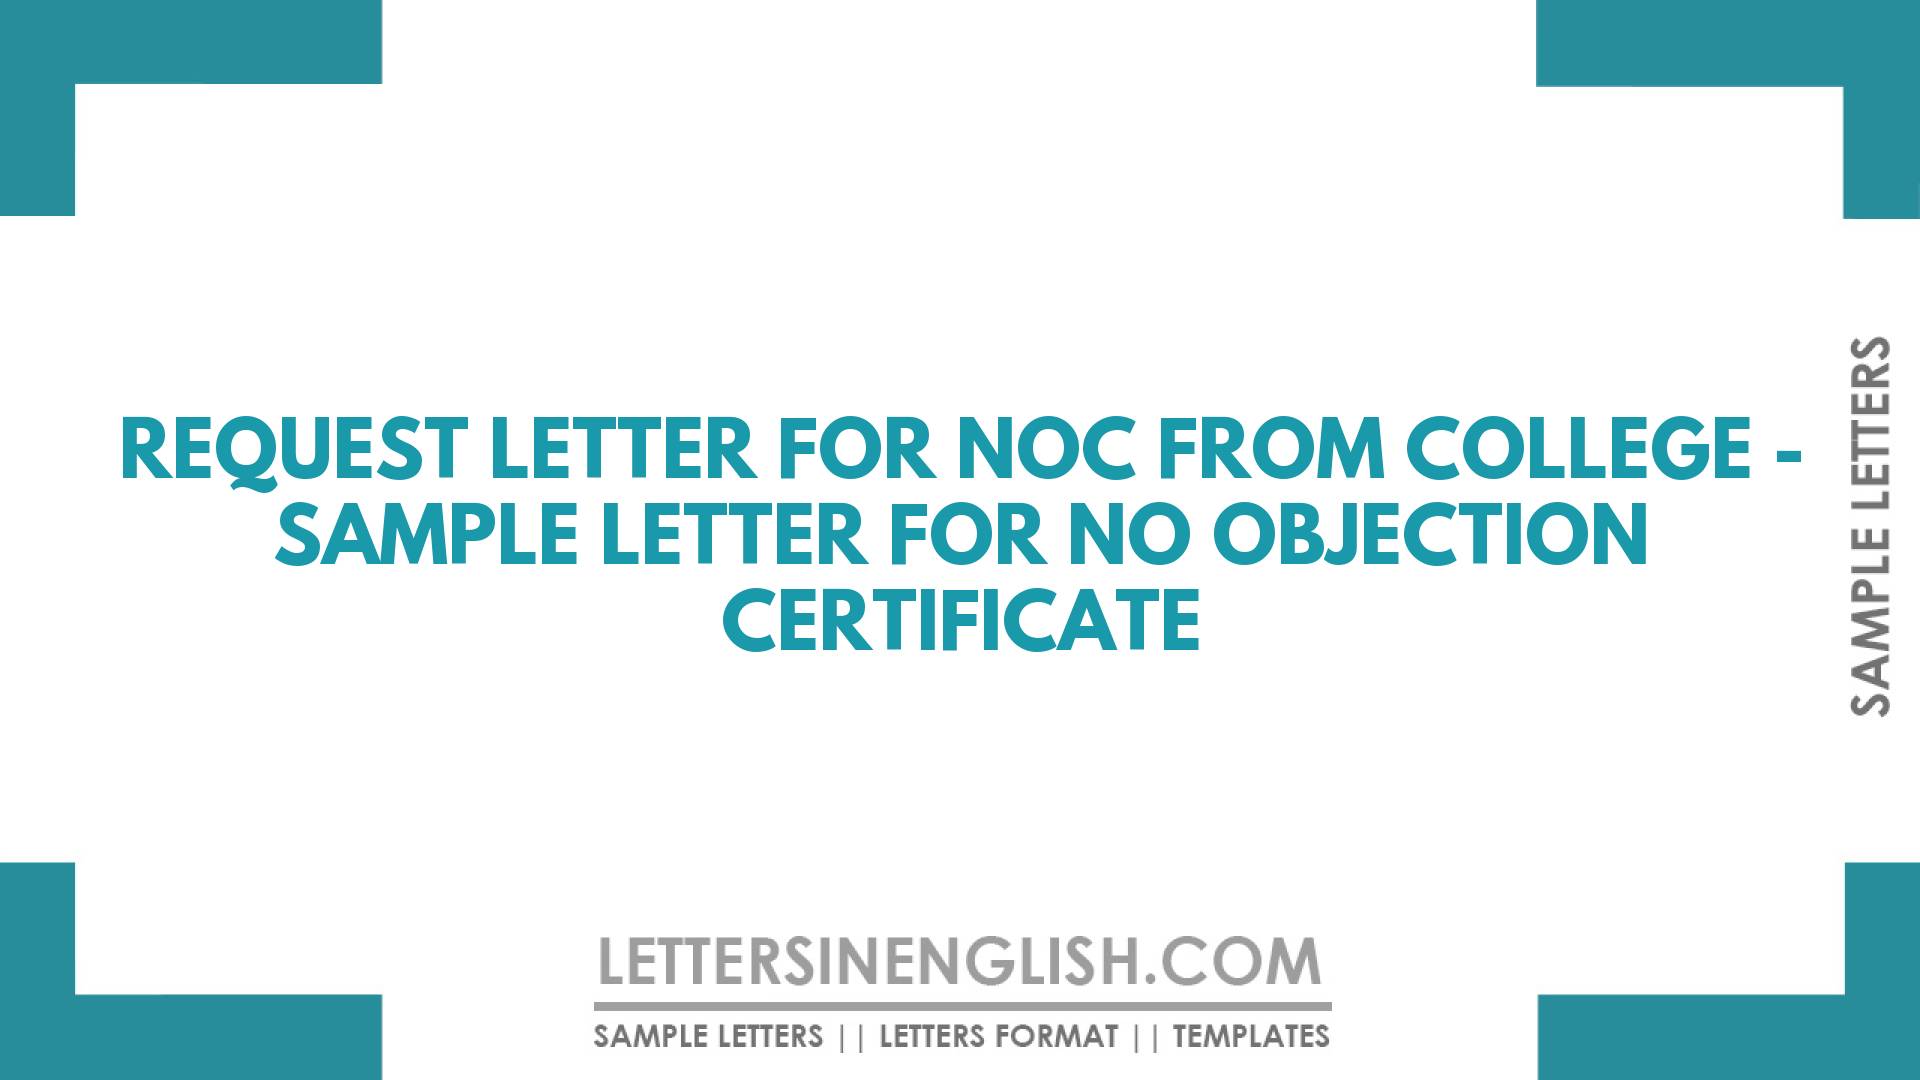 Request Letter for NOC from College – Sample Letter for No Objection Certificate